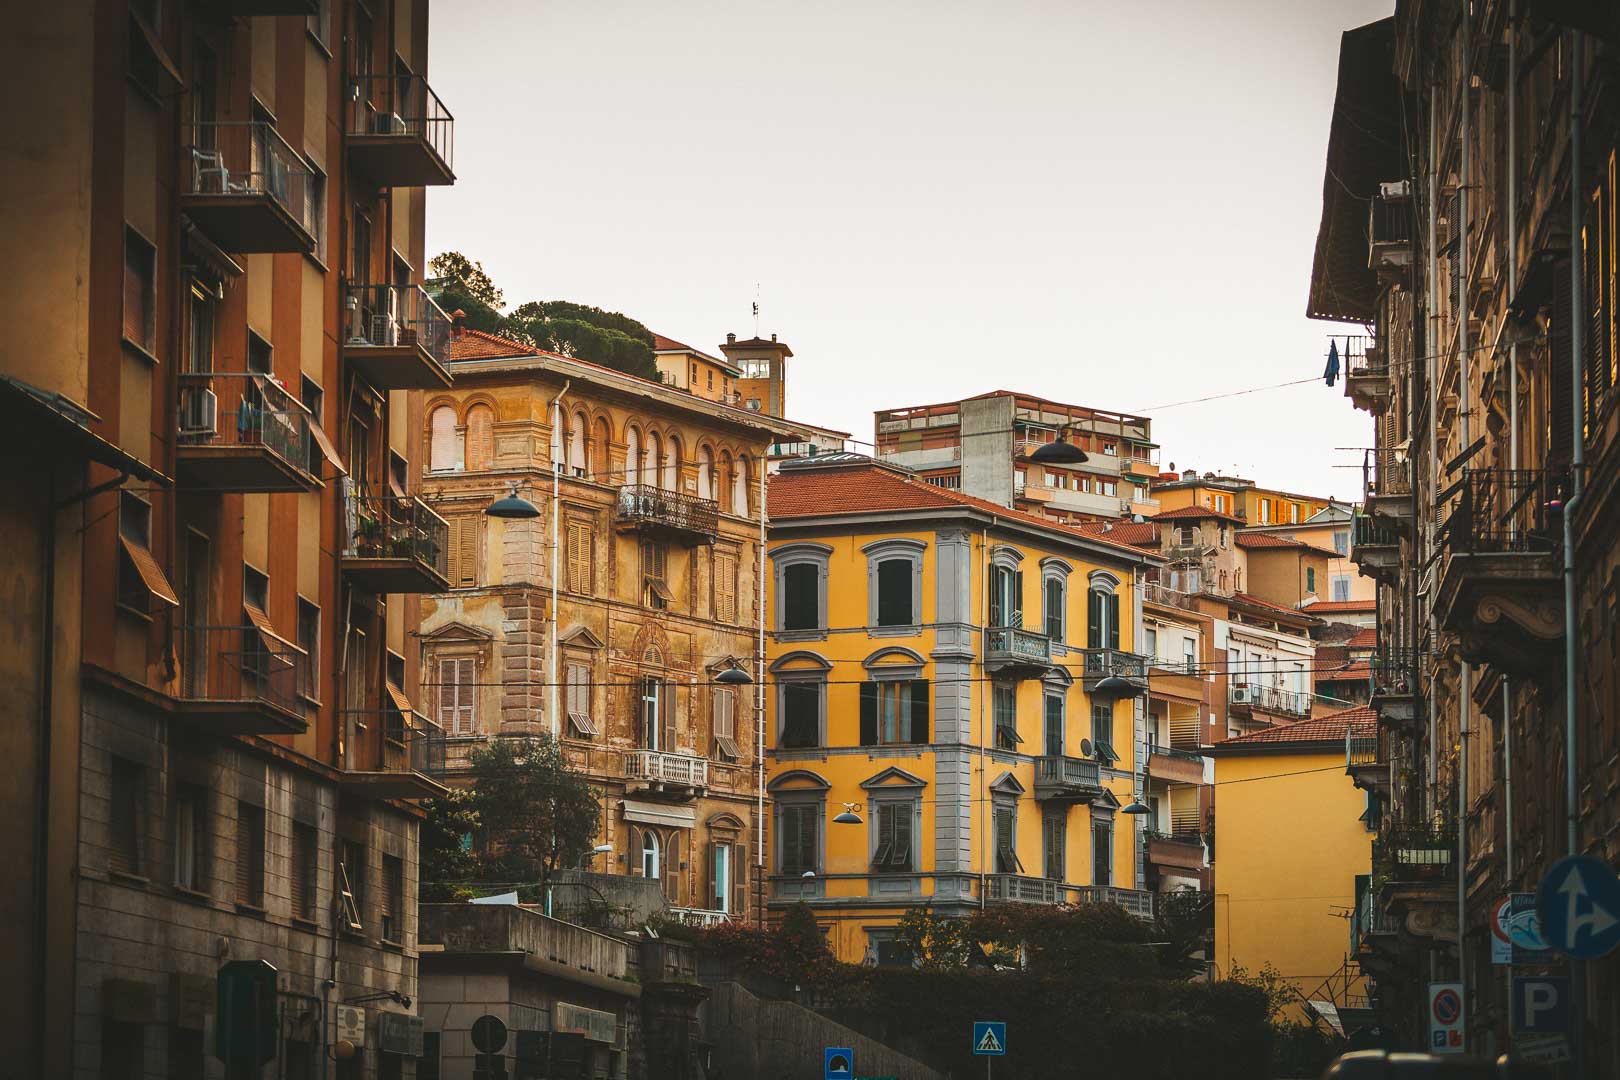 How to Visit La Spezia, Italy in a Short Time